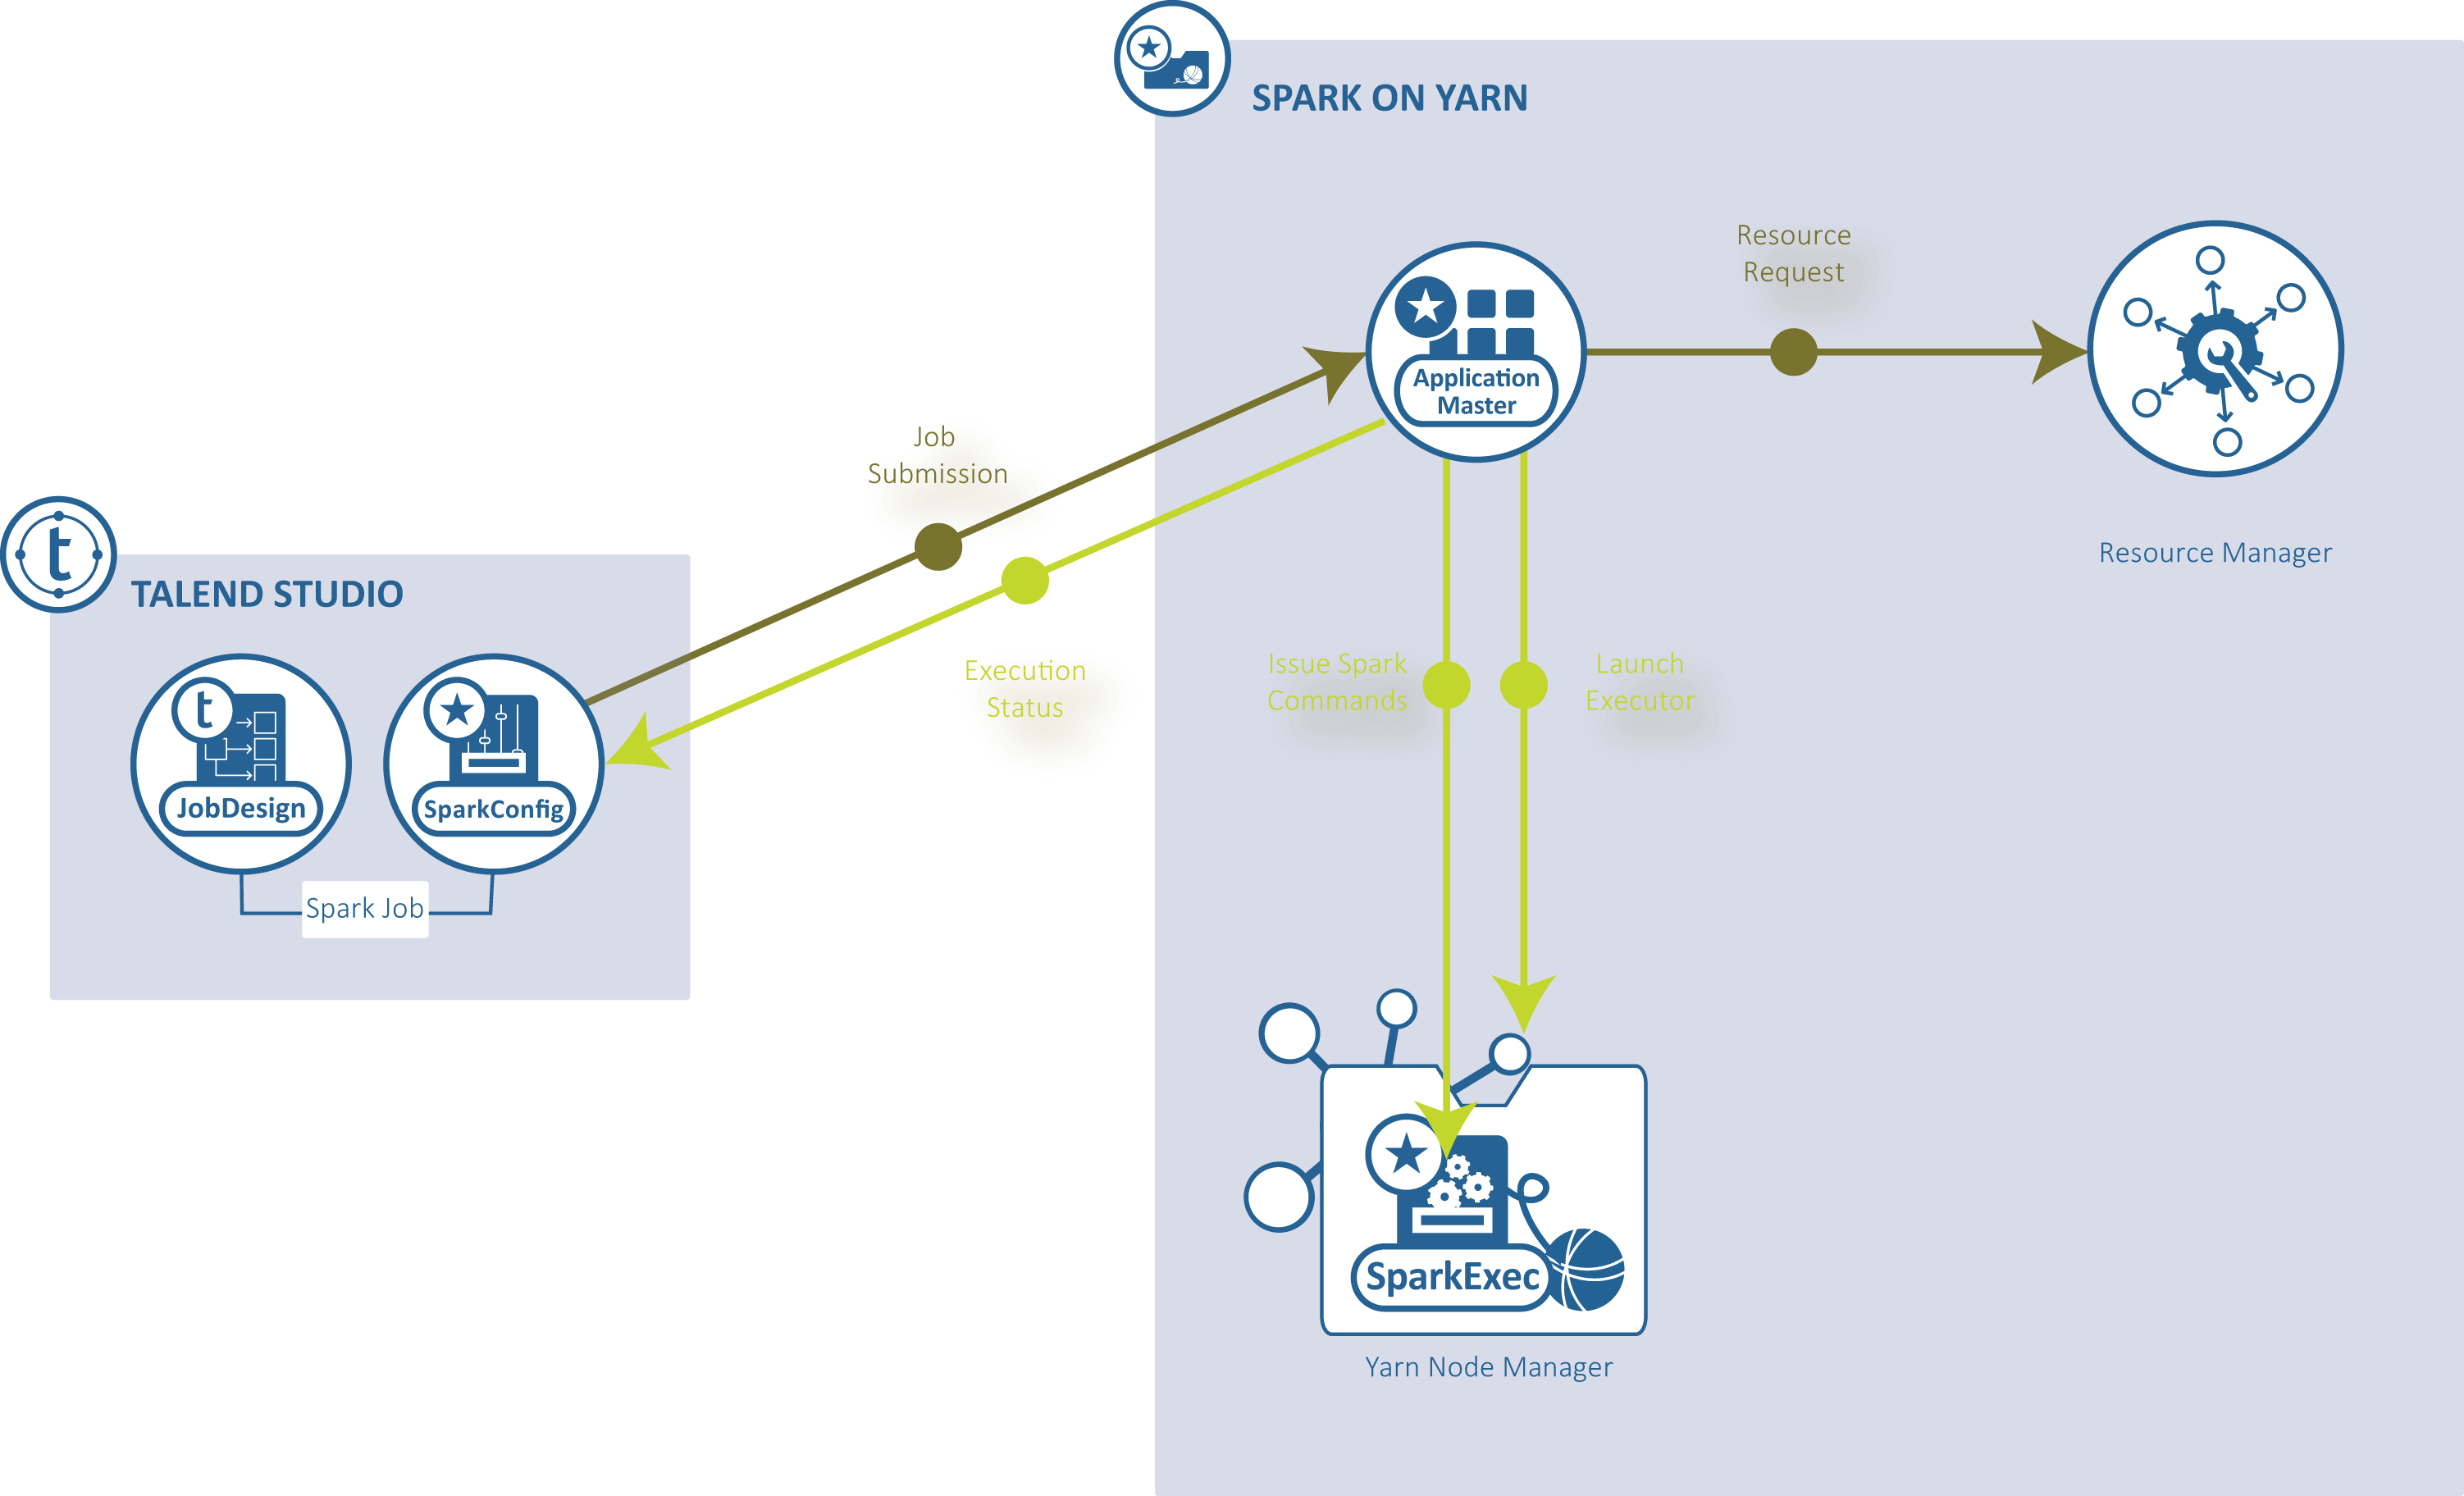 Schema illustrating the Spark YARN client mode in Talend Studio.